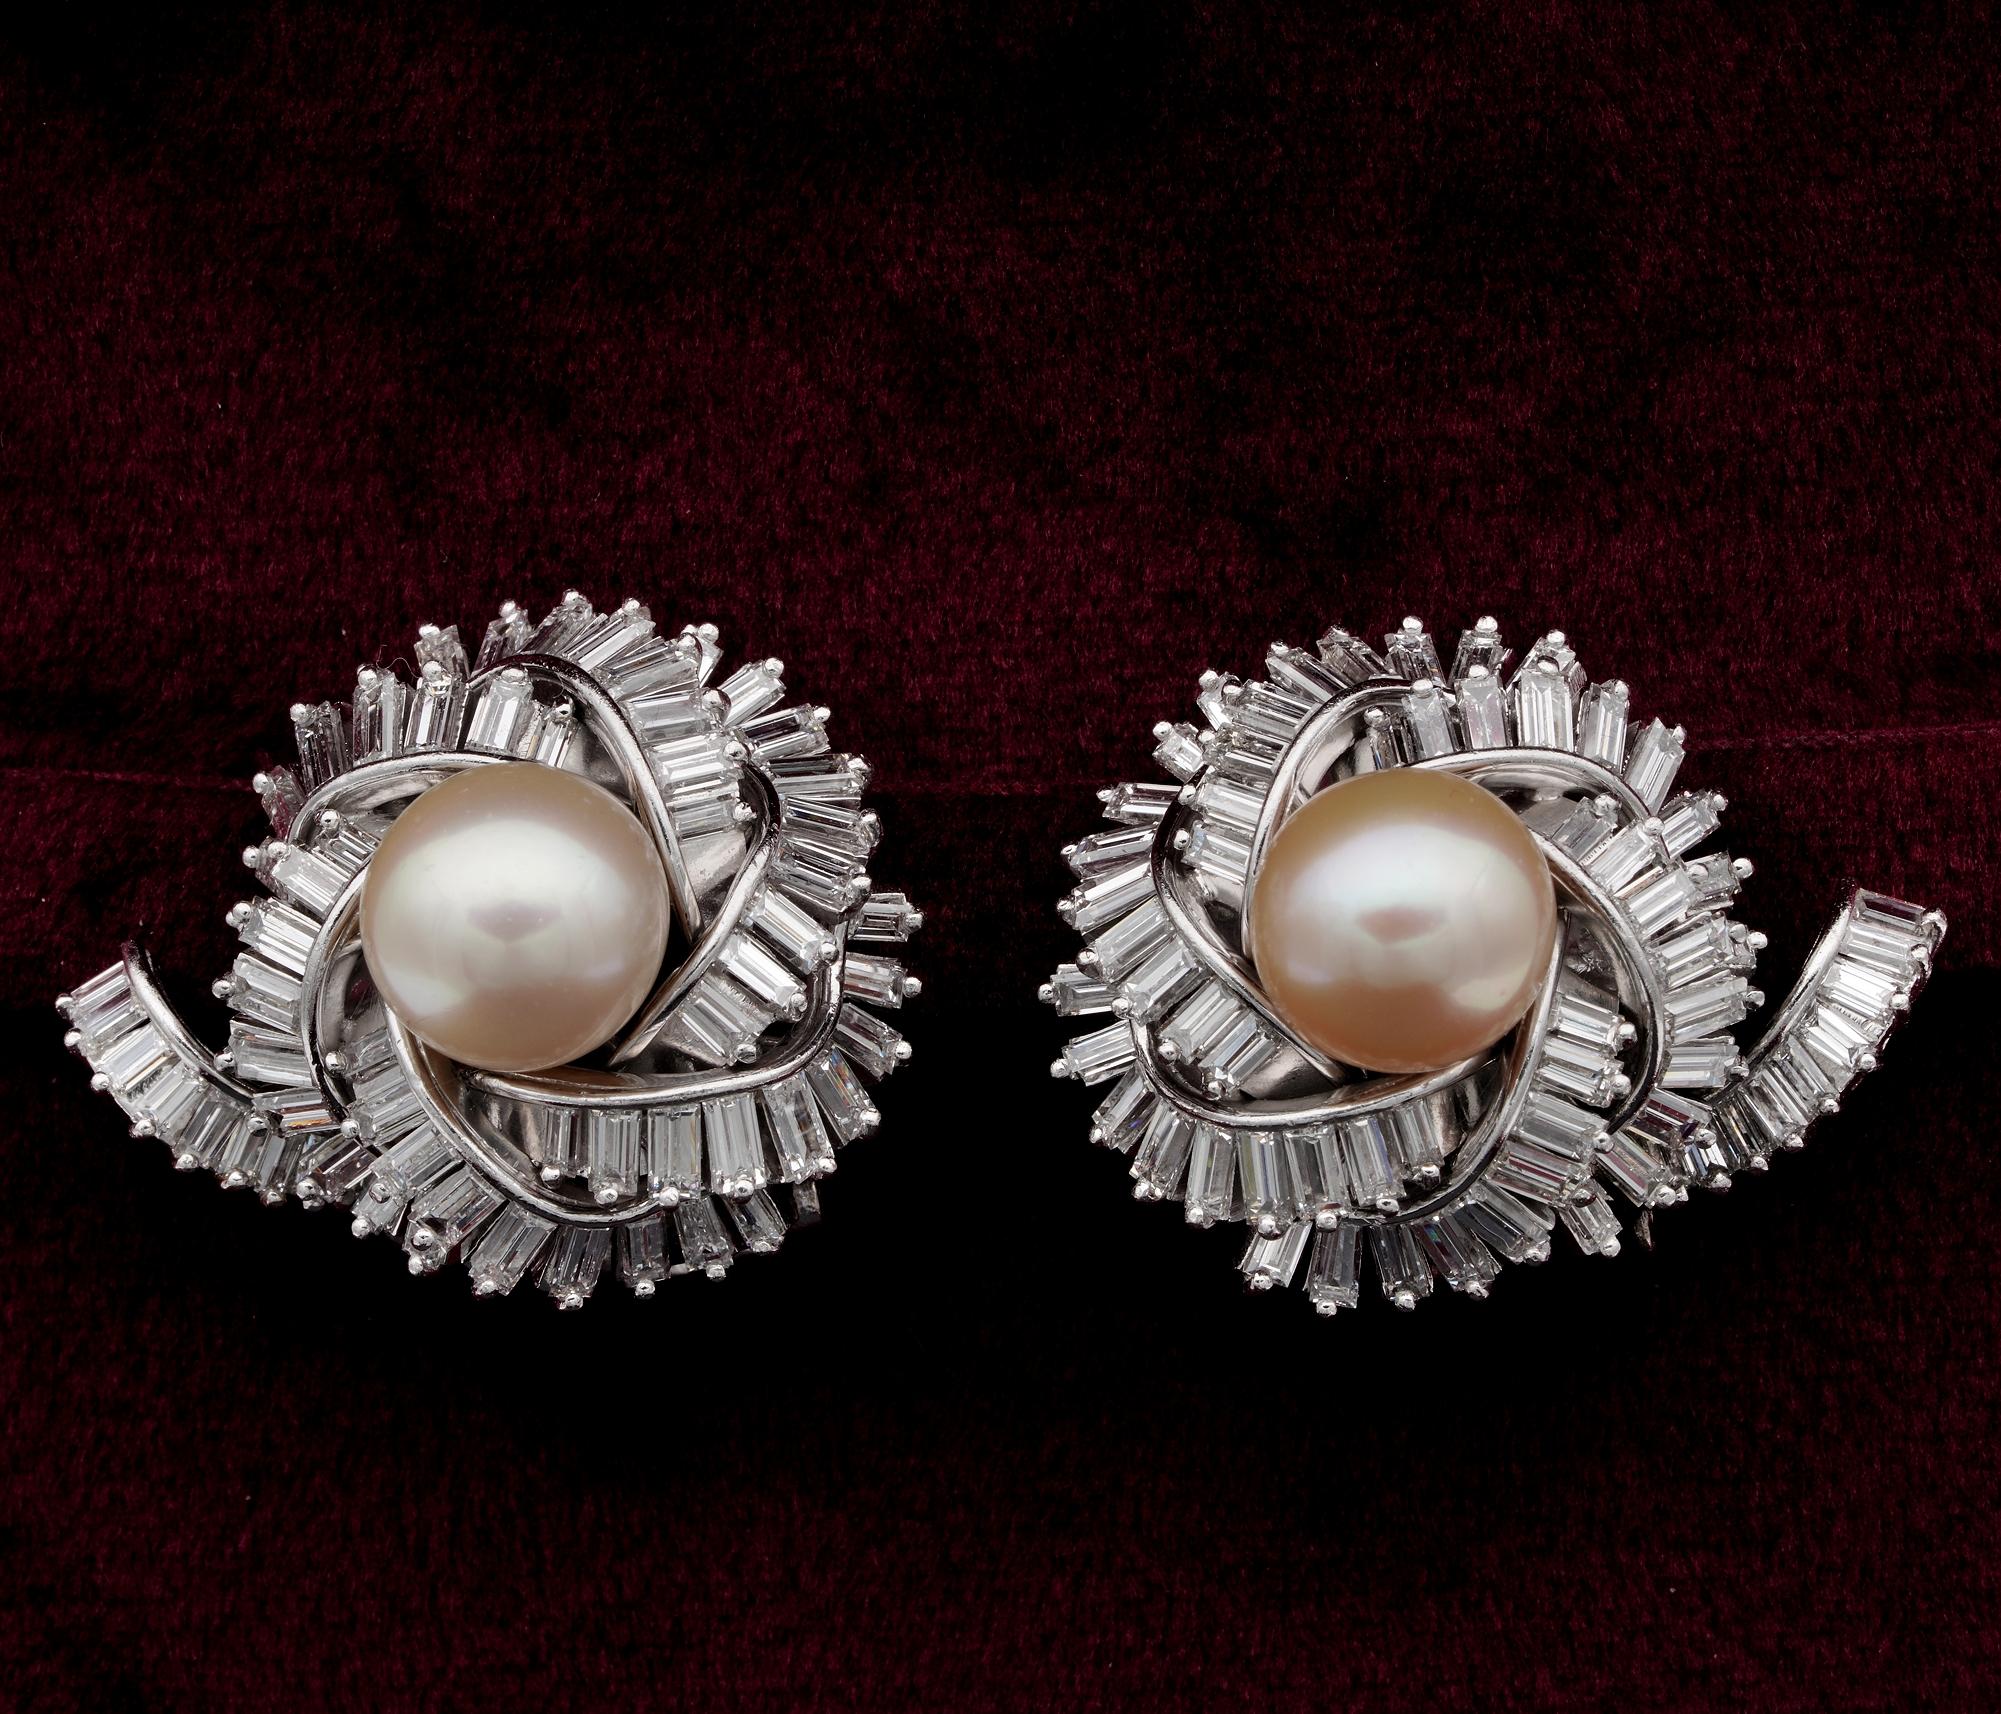 Spectacular pair very finely hand crafted as unique pair of solid PLATINUM, 1960 ca
Fantastic design made out by tiers of baguette Diamonds and Japanese Pearls in a dazzling knot, tasteful style boasting incredible past craftsmanship of endless